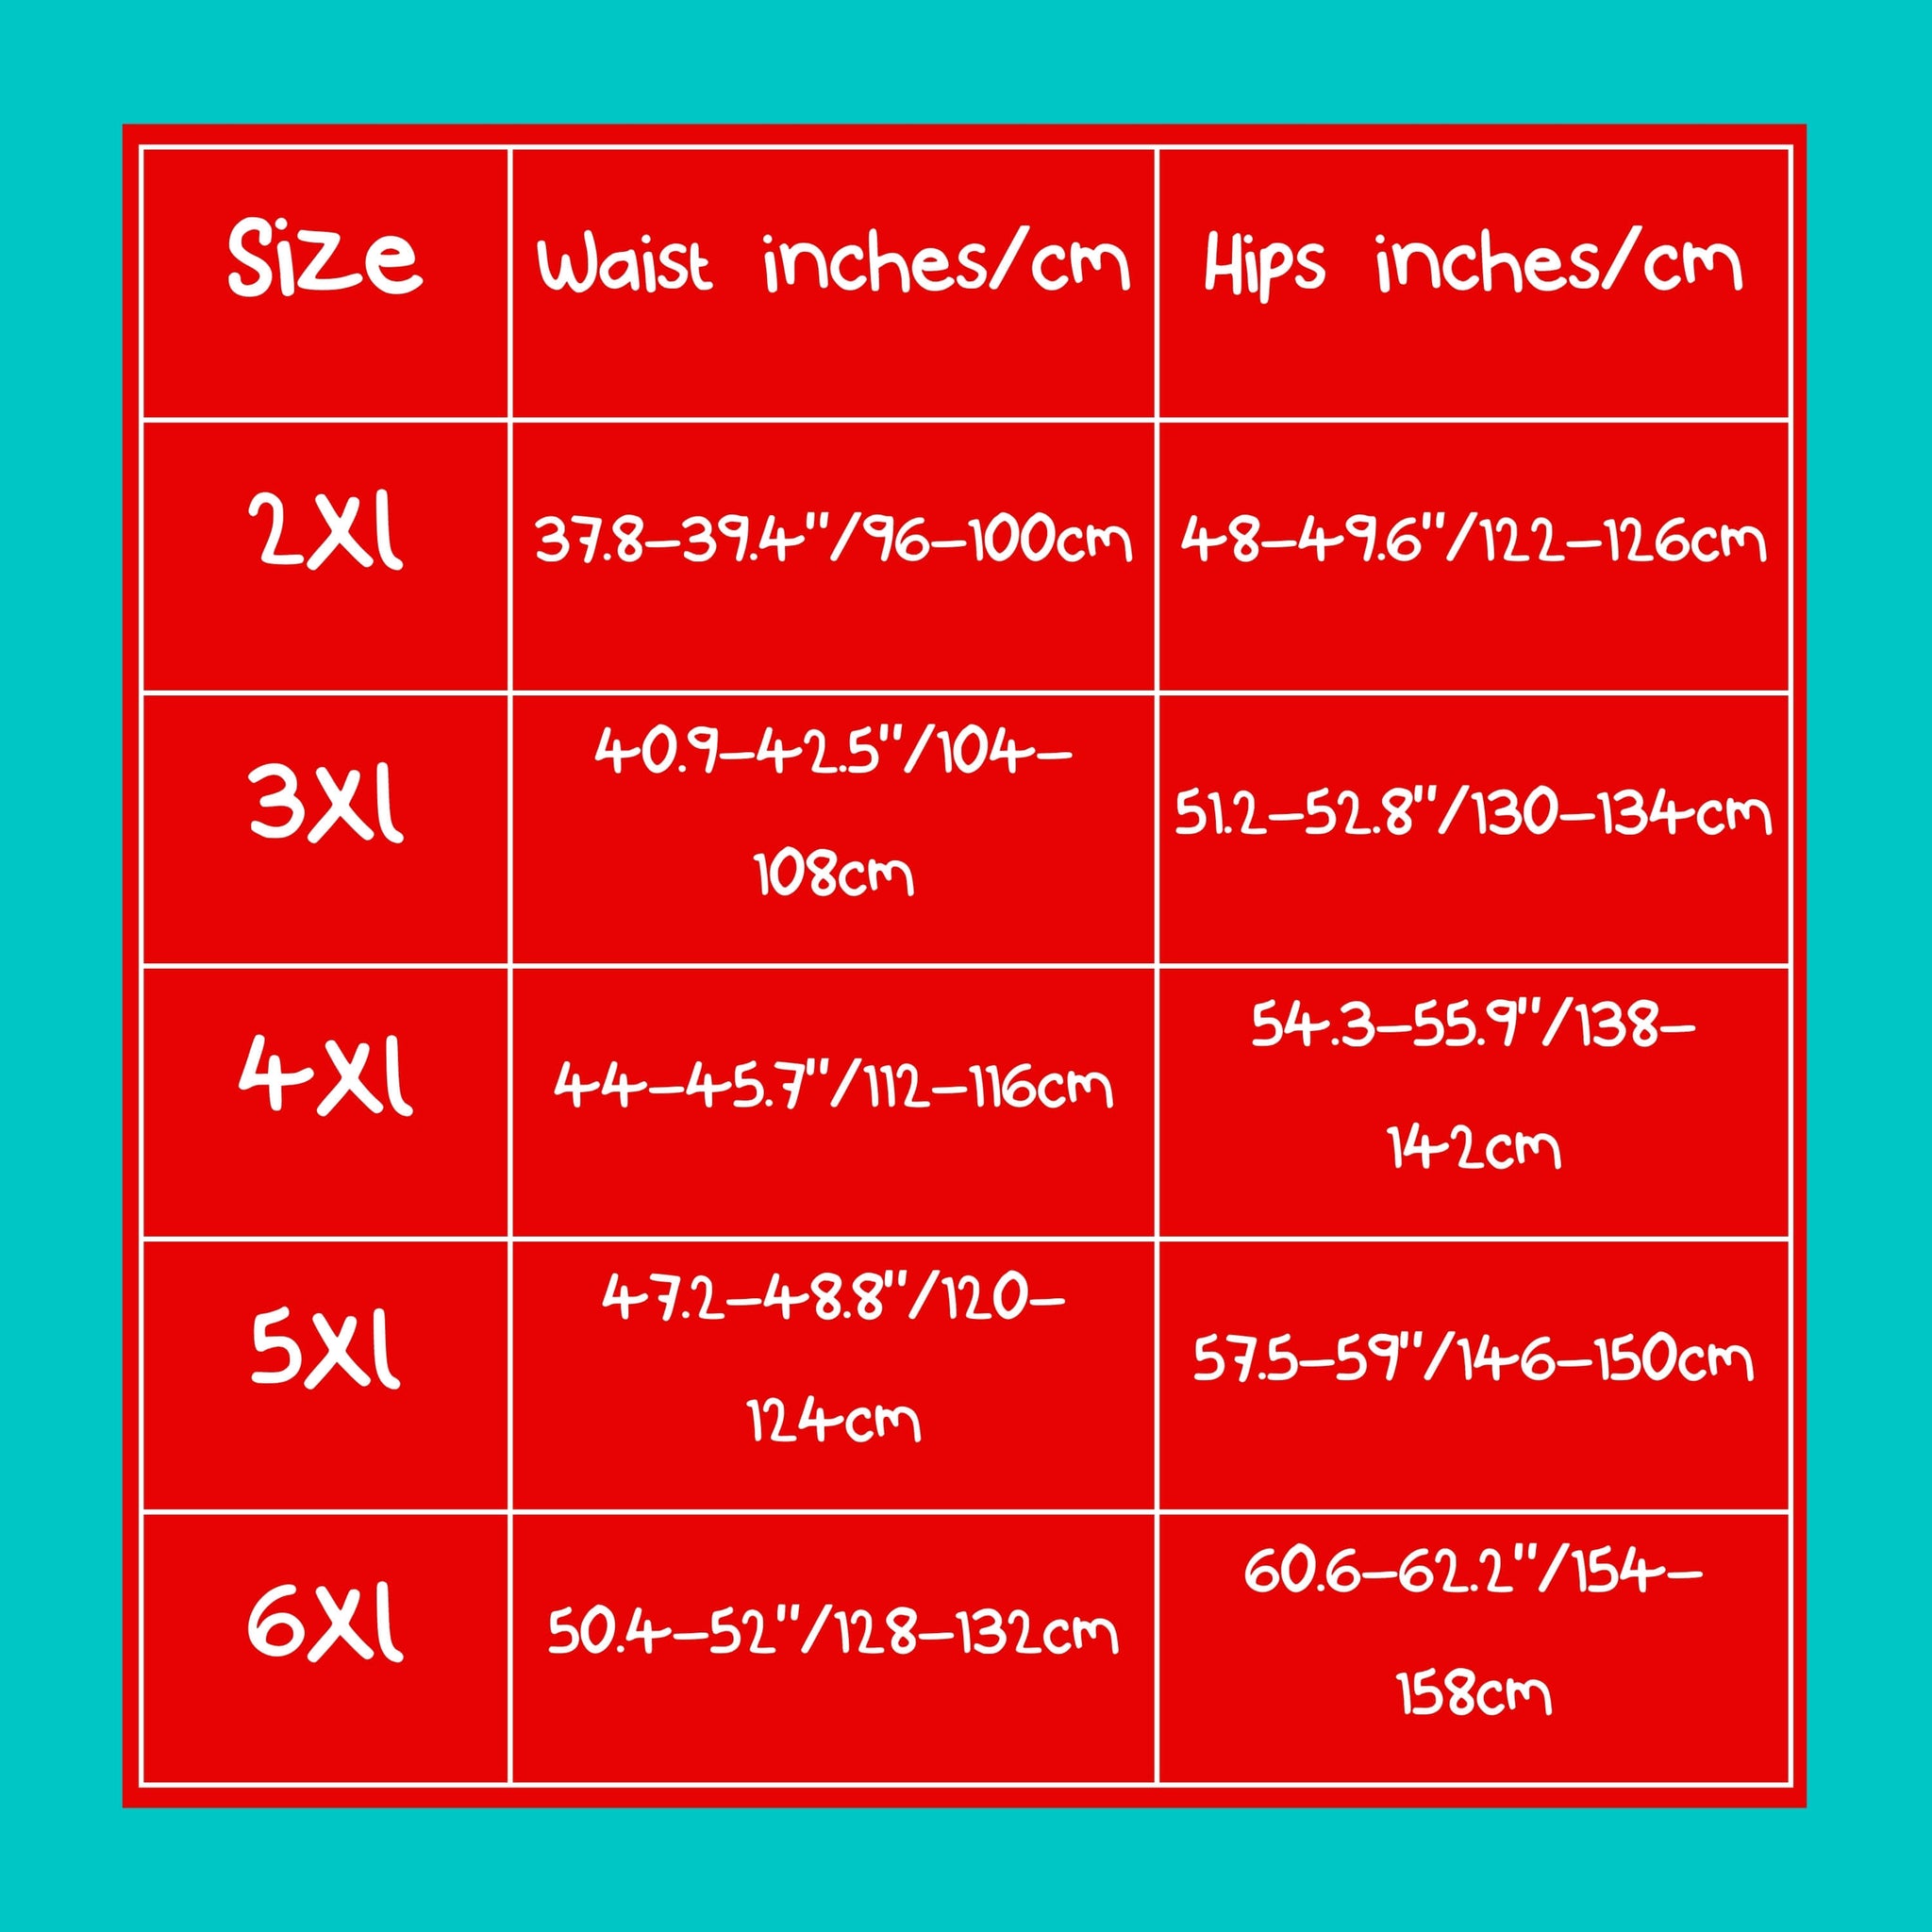 Size guide size chart measurements in centimetres and inches of the brain frog plus size leggings - brain fog in a blue, red and white cell table.